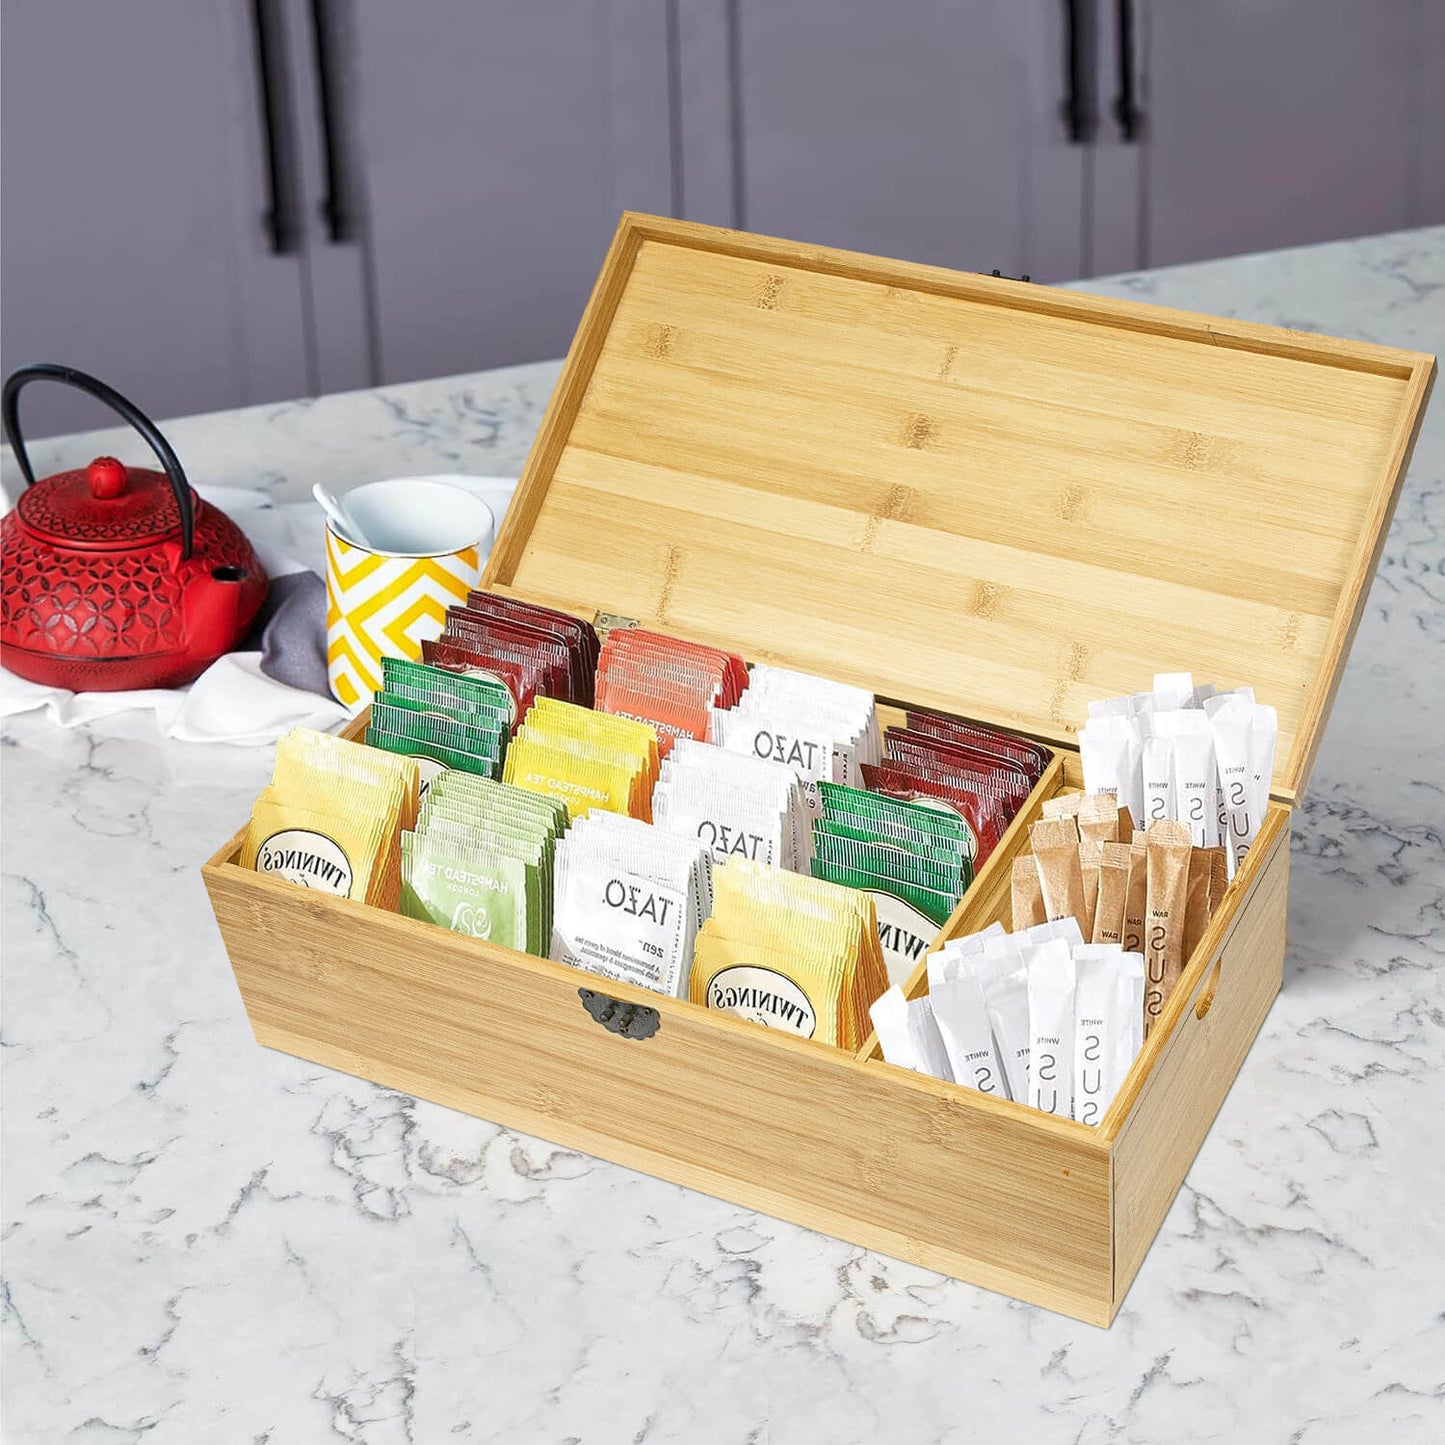 GL-Bamboo Tea Bag Storage Box with Side Pull Drawer